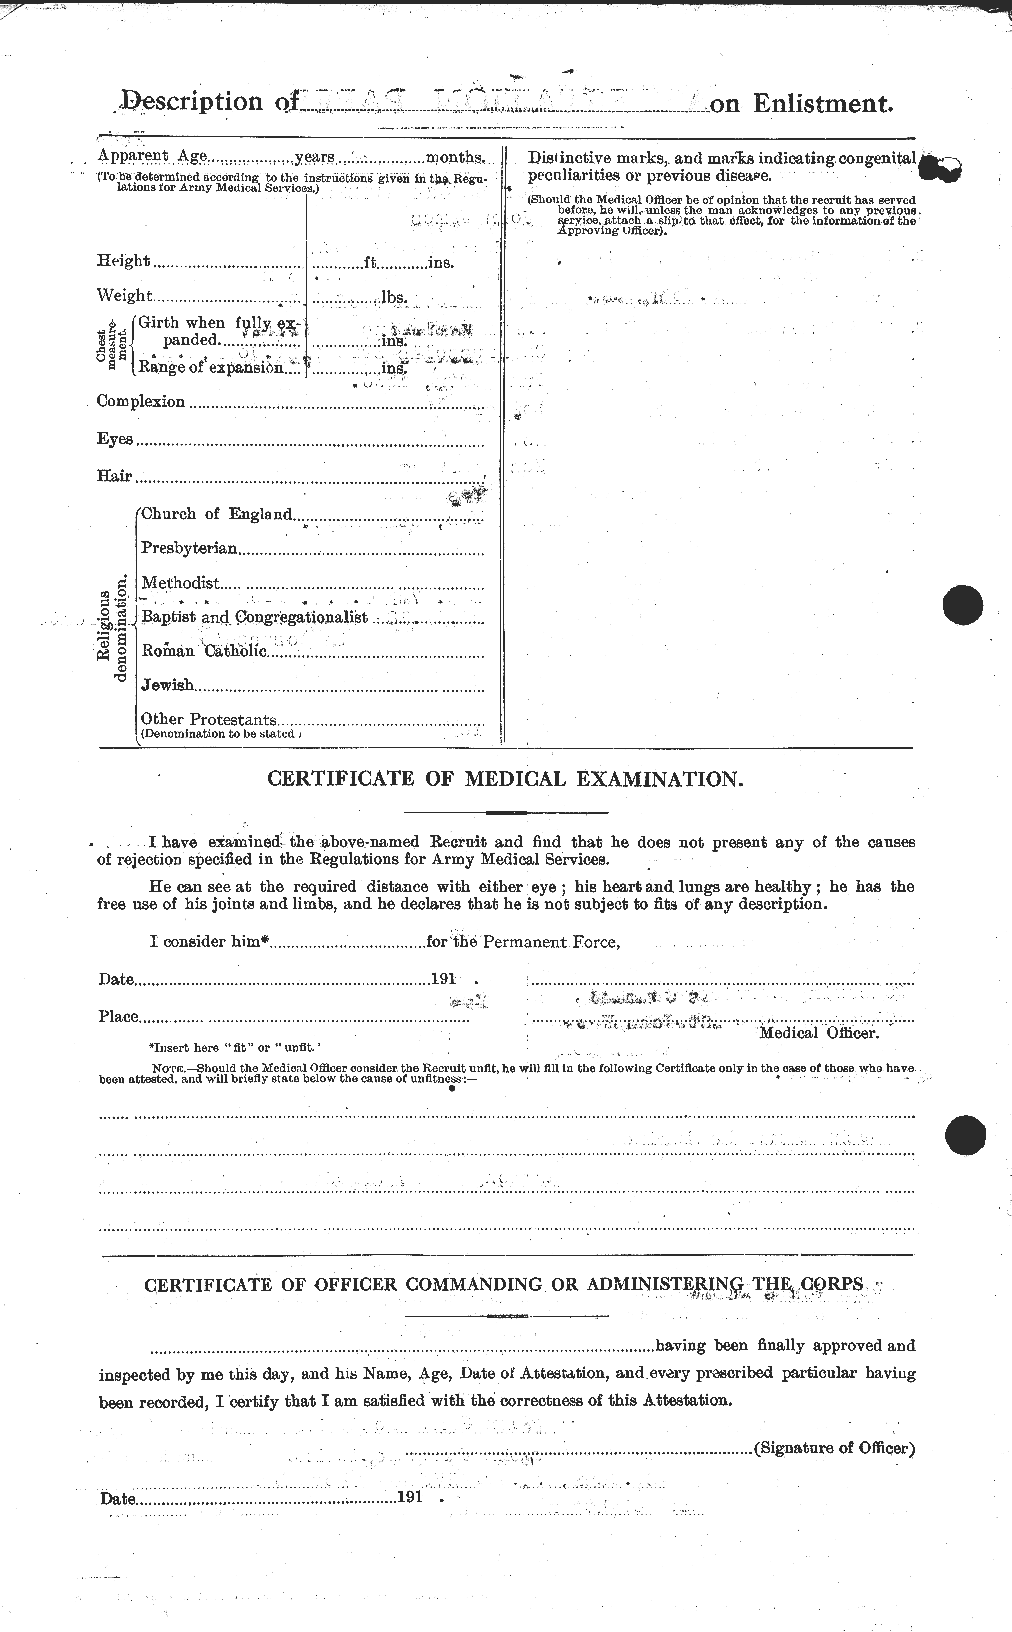 Personnel Records of the First World War - CEF 522115b